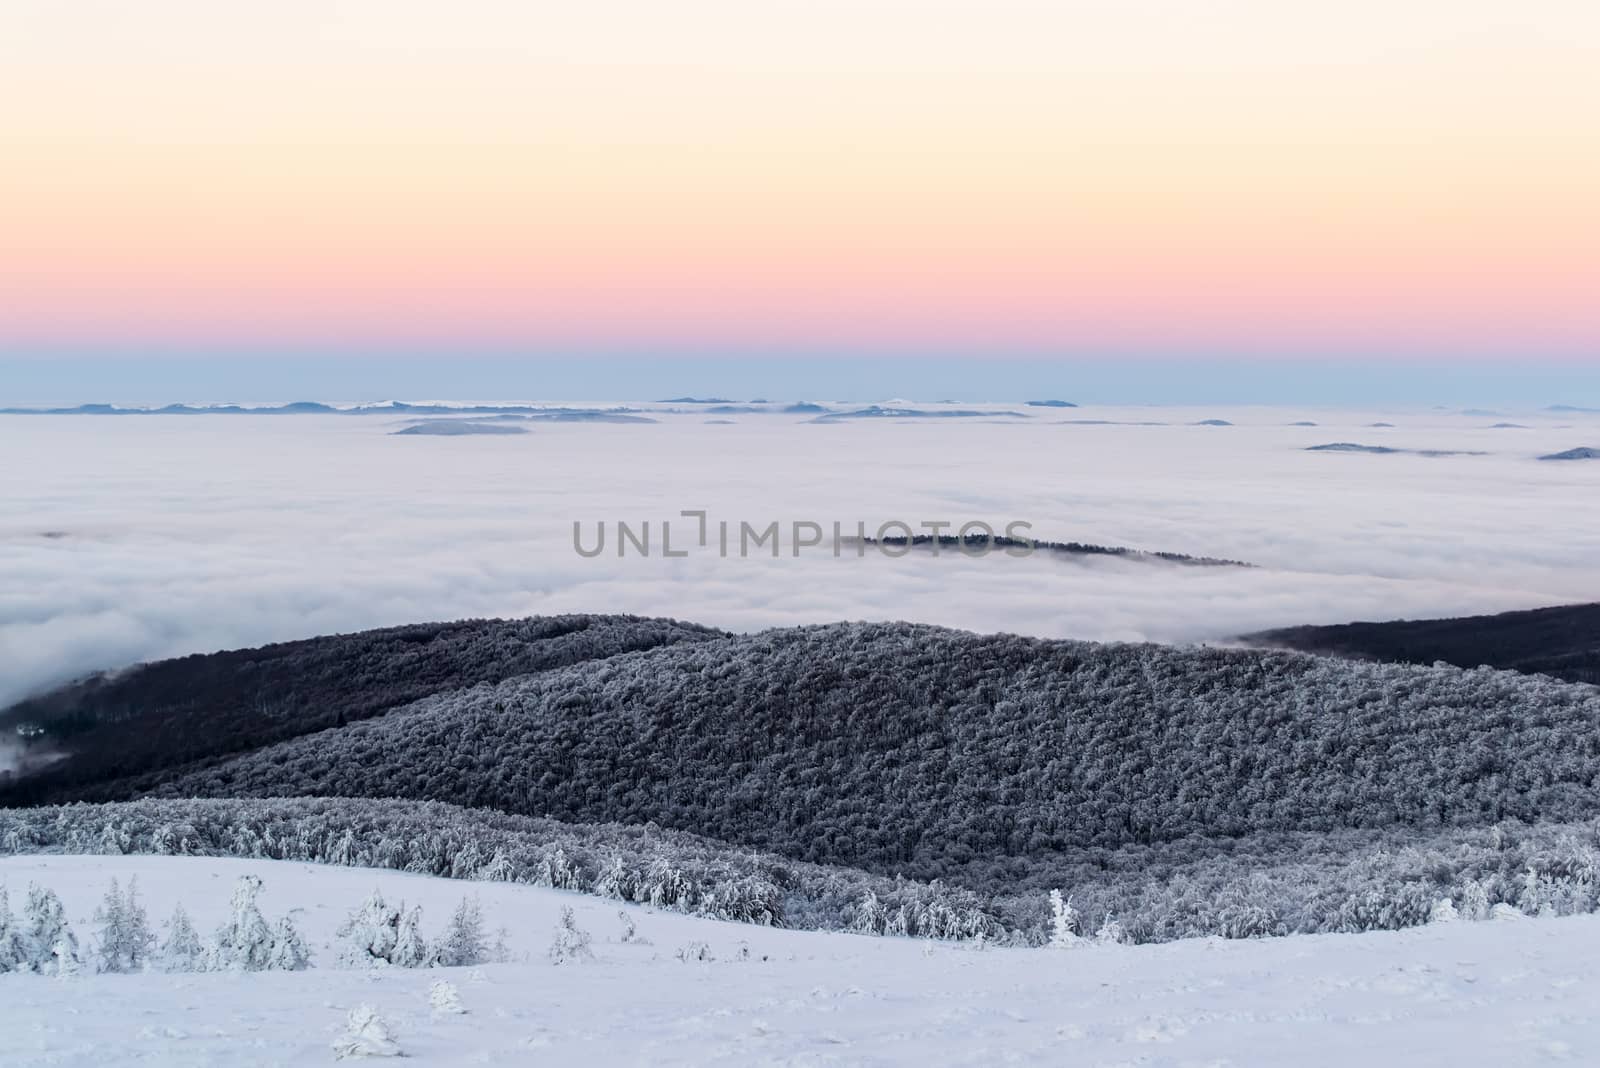 Scenic winter landscape above the clouds. The sky is clear. After dusk. Some mountains are seen on the horizon.